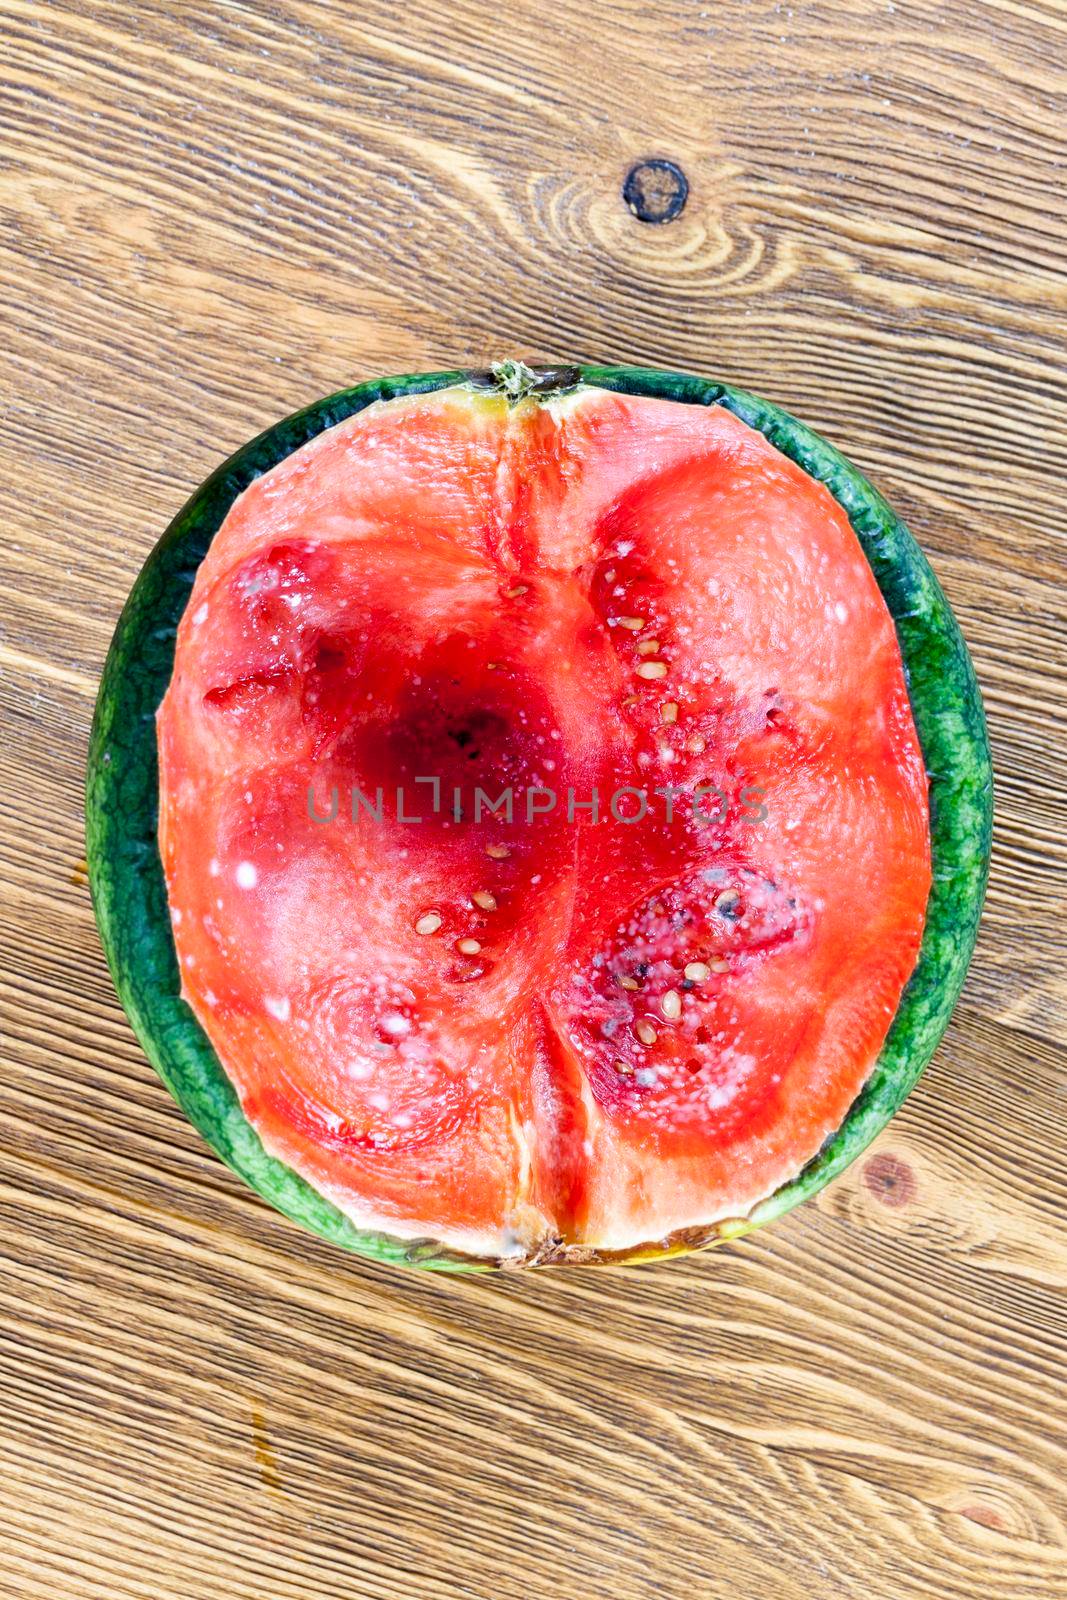 watermelon with a mold by avq